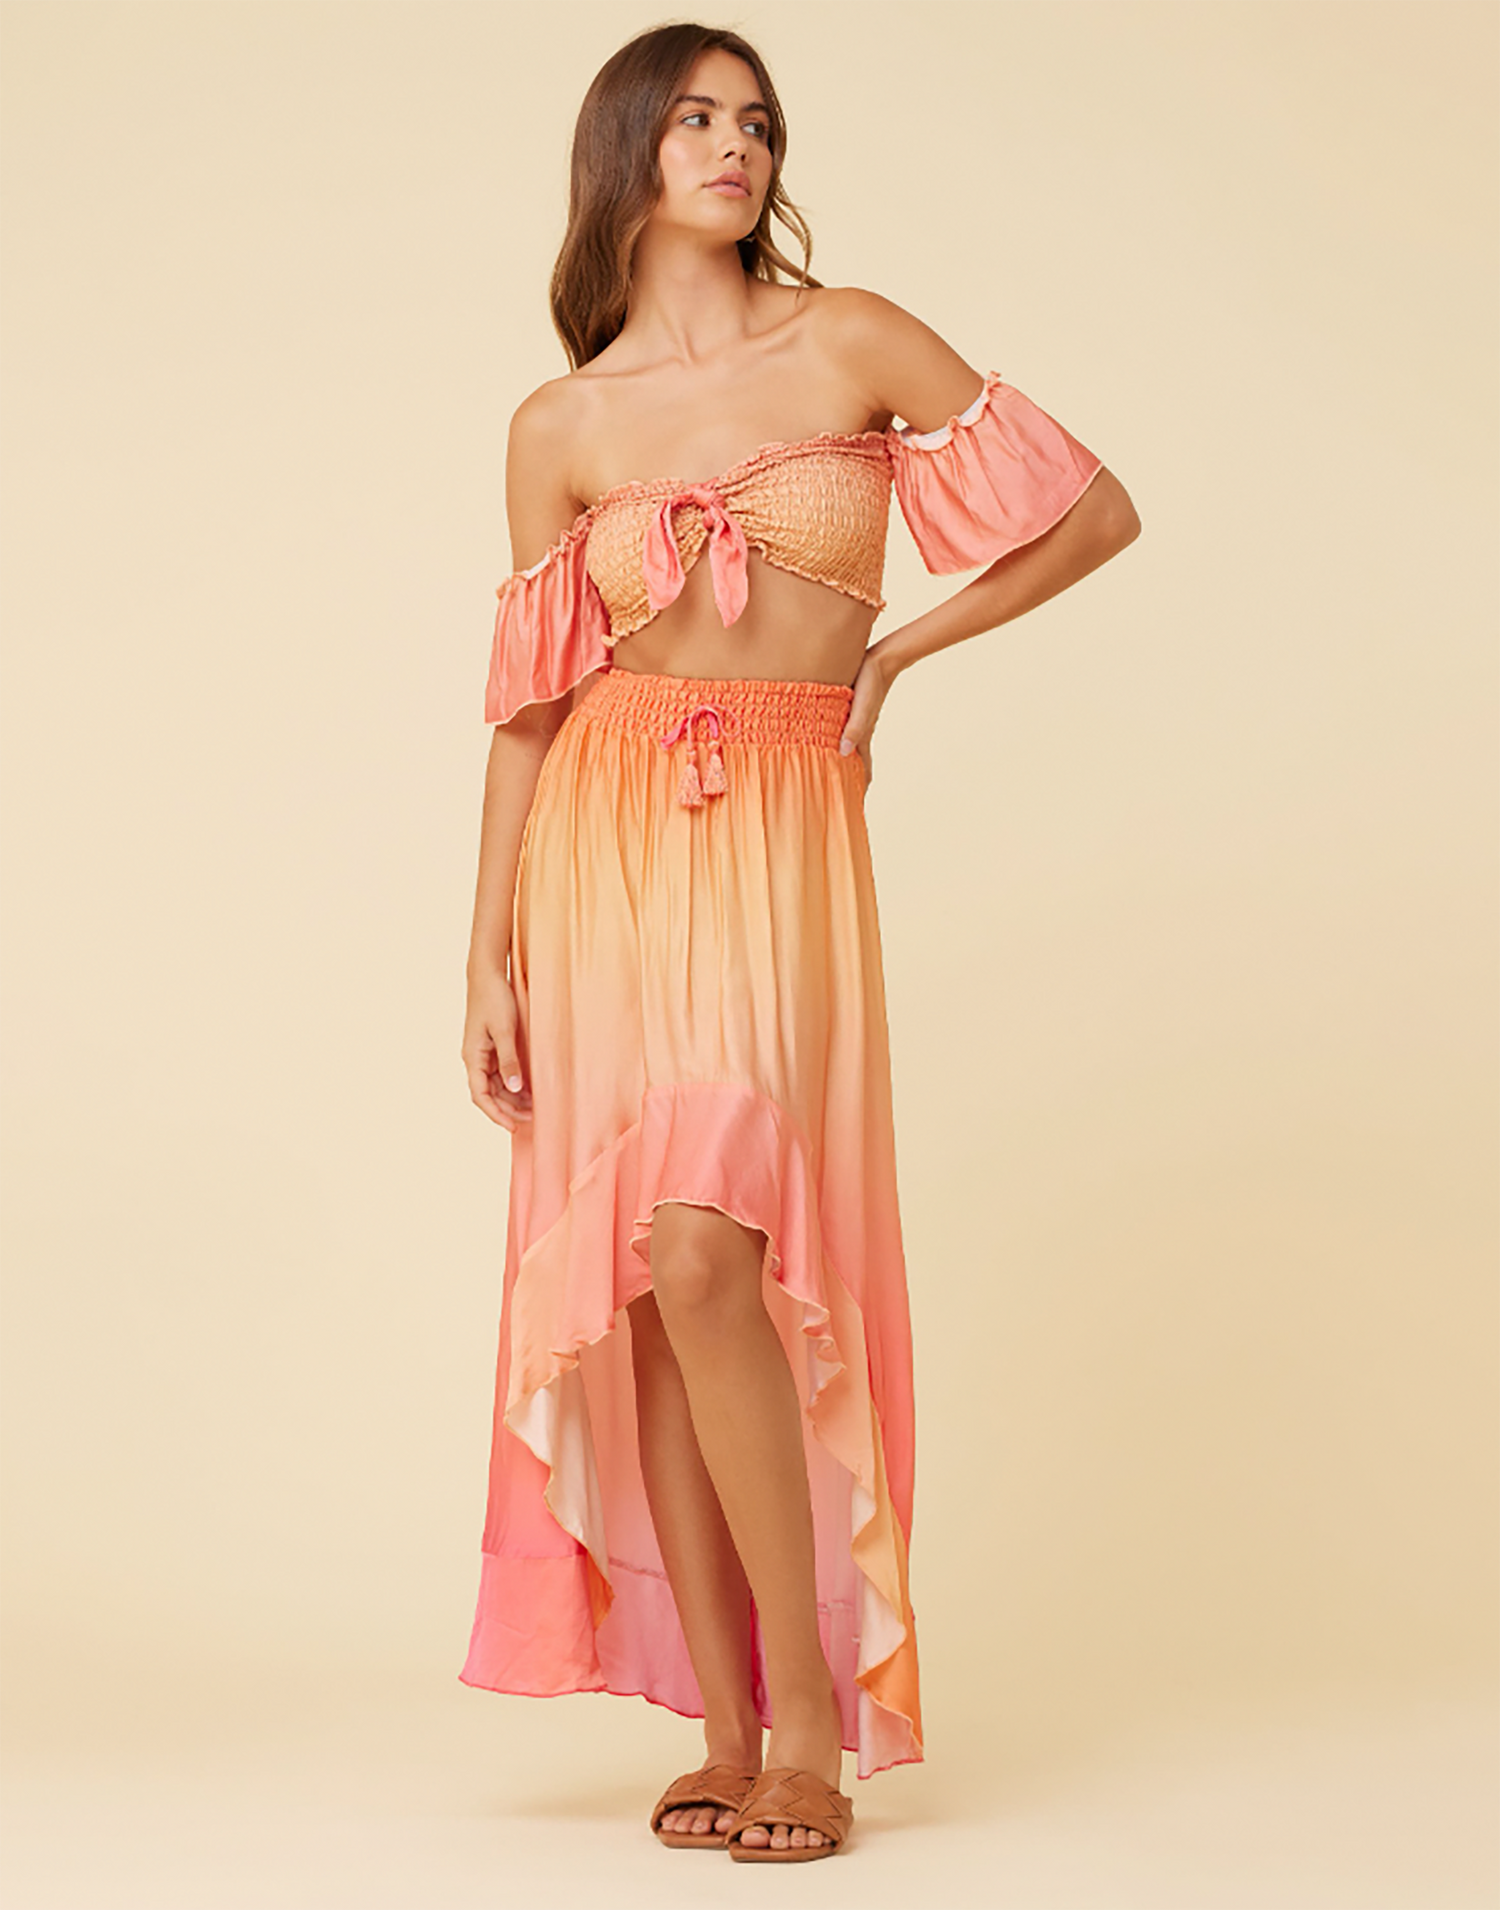 Dip Dye Tie Front Top by Surf Gypsy in Sunset Ombre - Front View